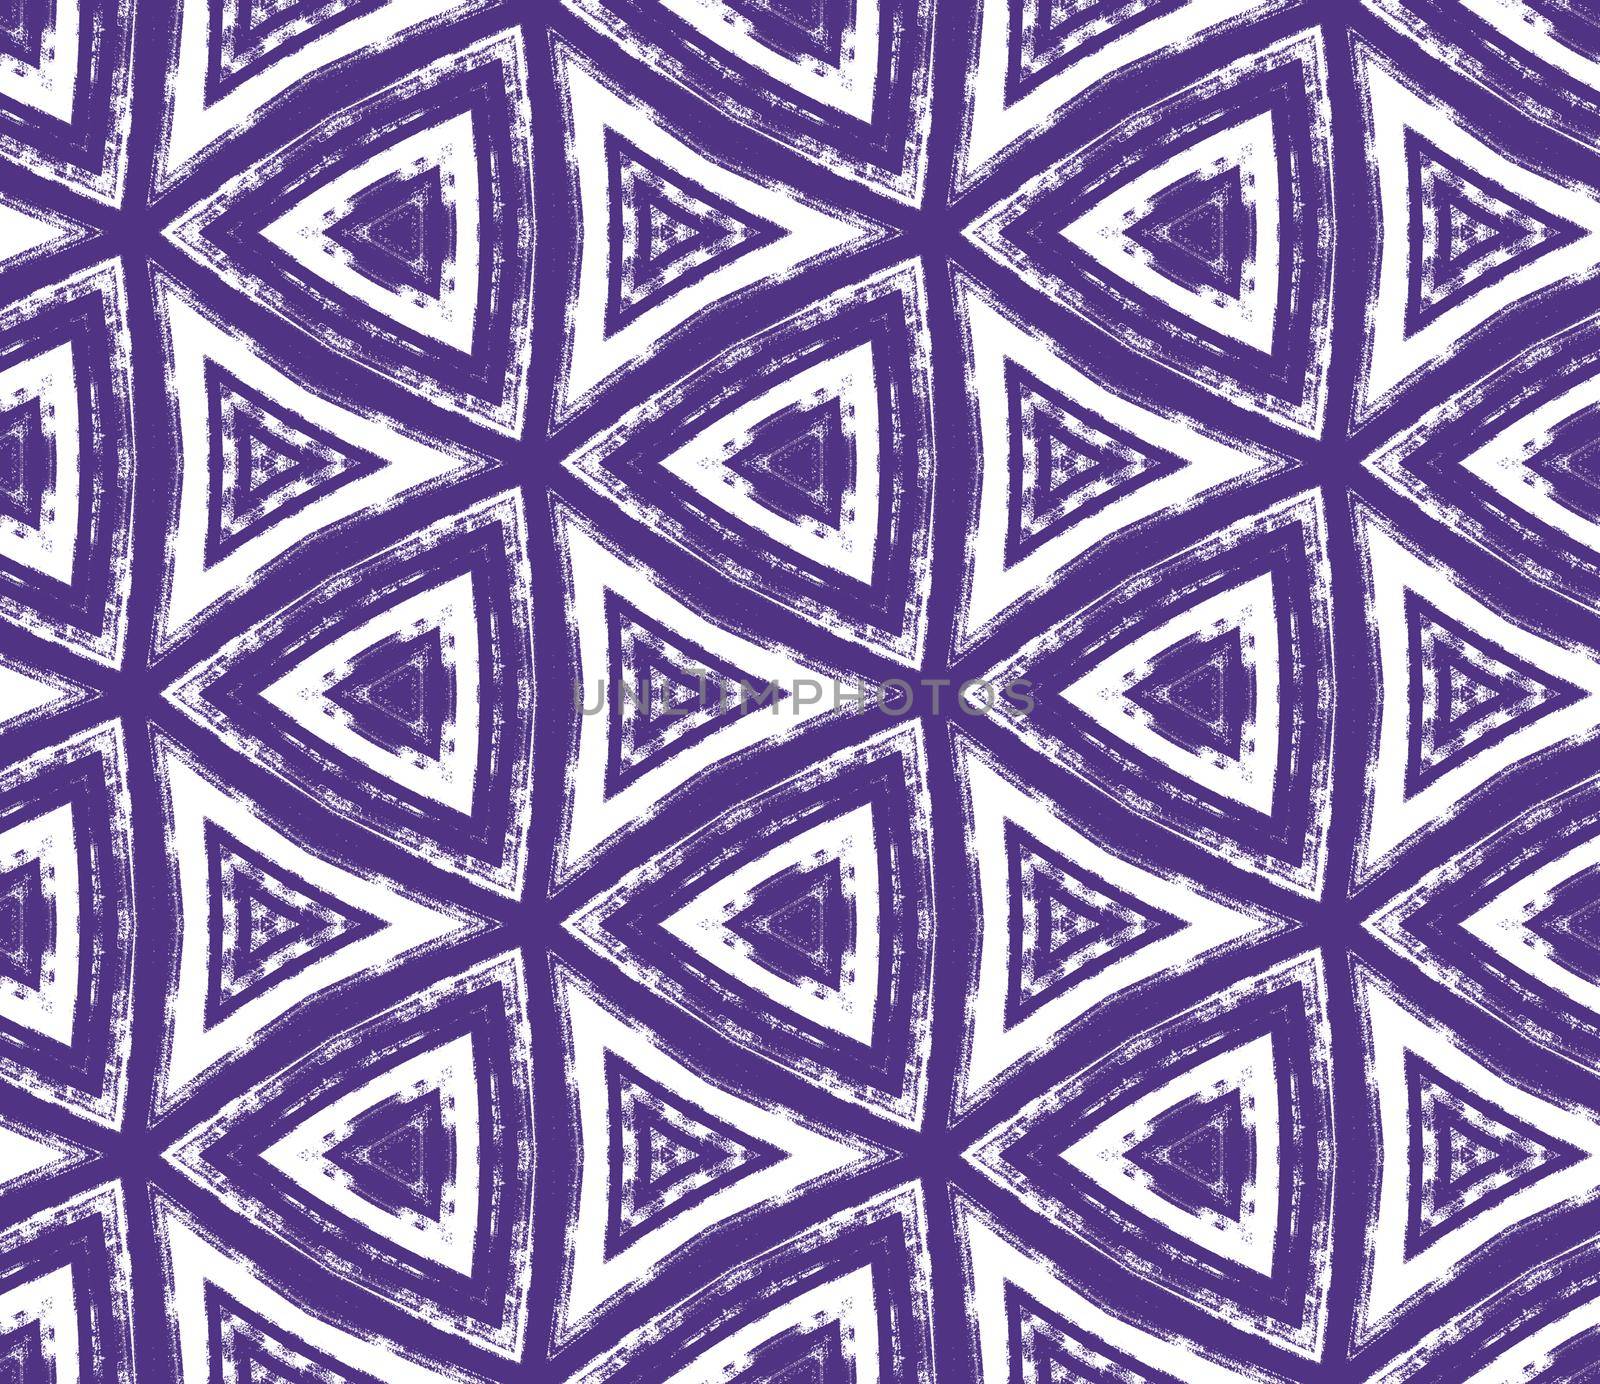 Tiled watercolor pattern. Purple symmetrical kaleidoscope background. Textile ready resplendent print, swimwear fabric, wallpaper, wrapping. Hand painted tiled watercolor seamless.